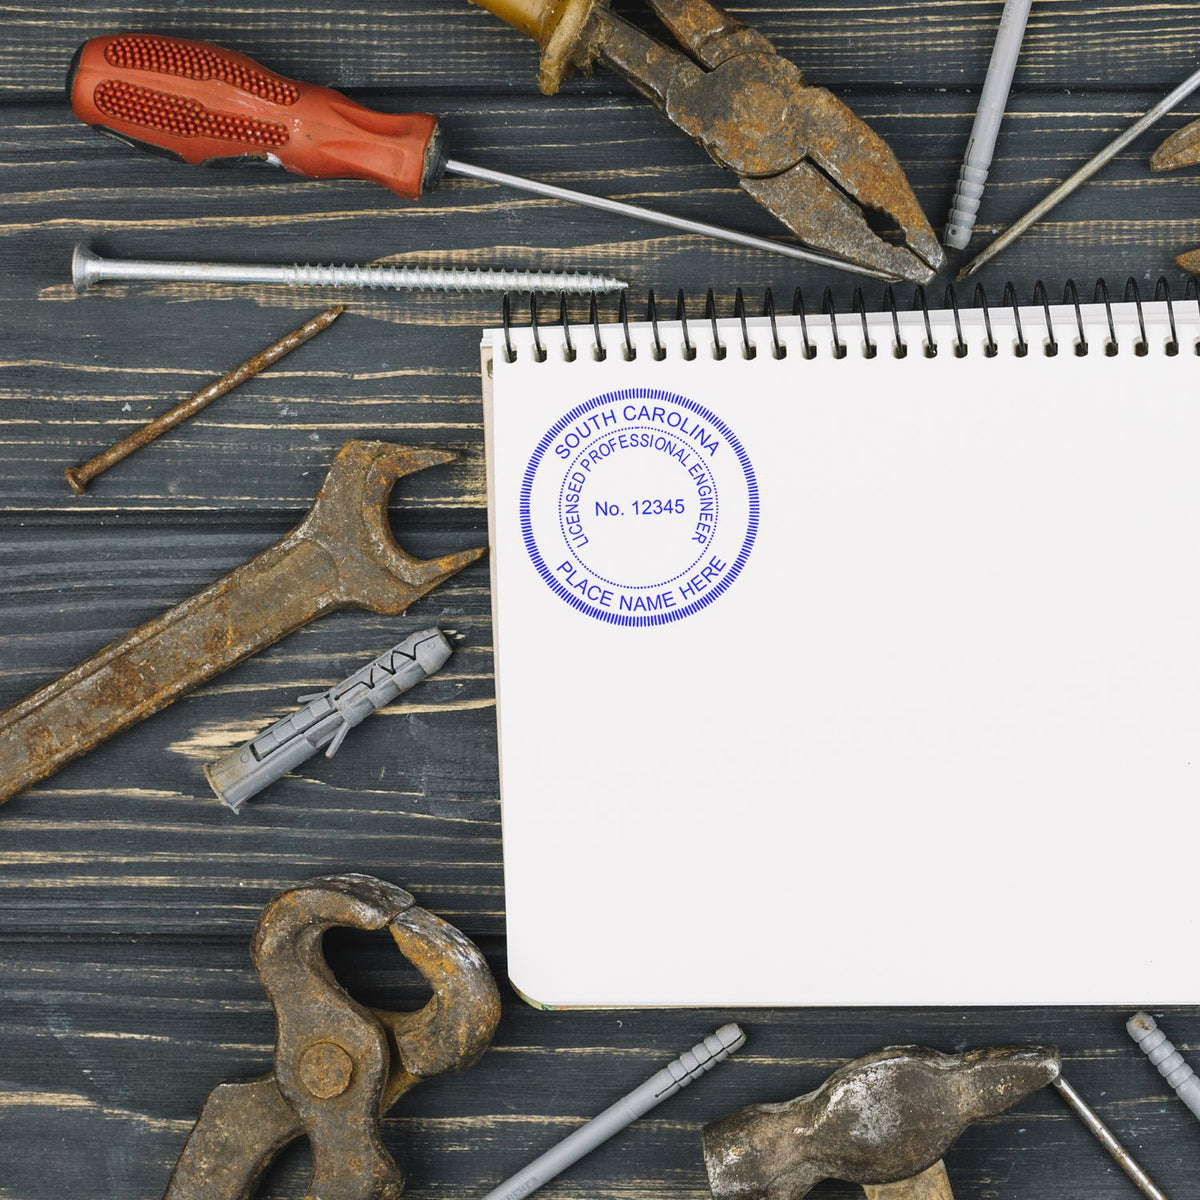 This paper is stamped with a sample imprint of the Digital South Carolina PE Stamp and Electronic Seal for South Carolina Engineer, signifying its quality and reliability.